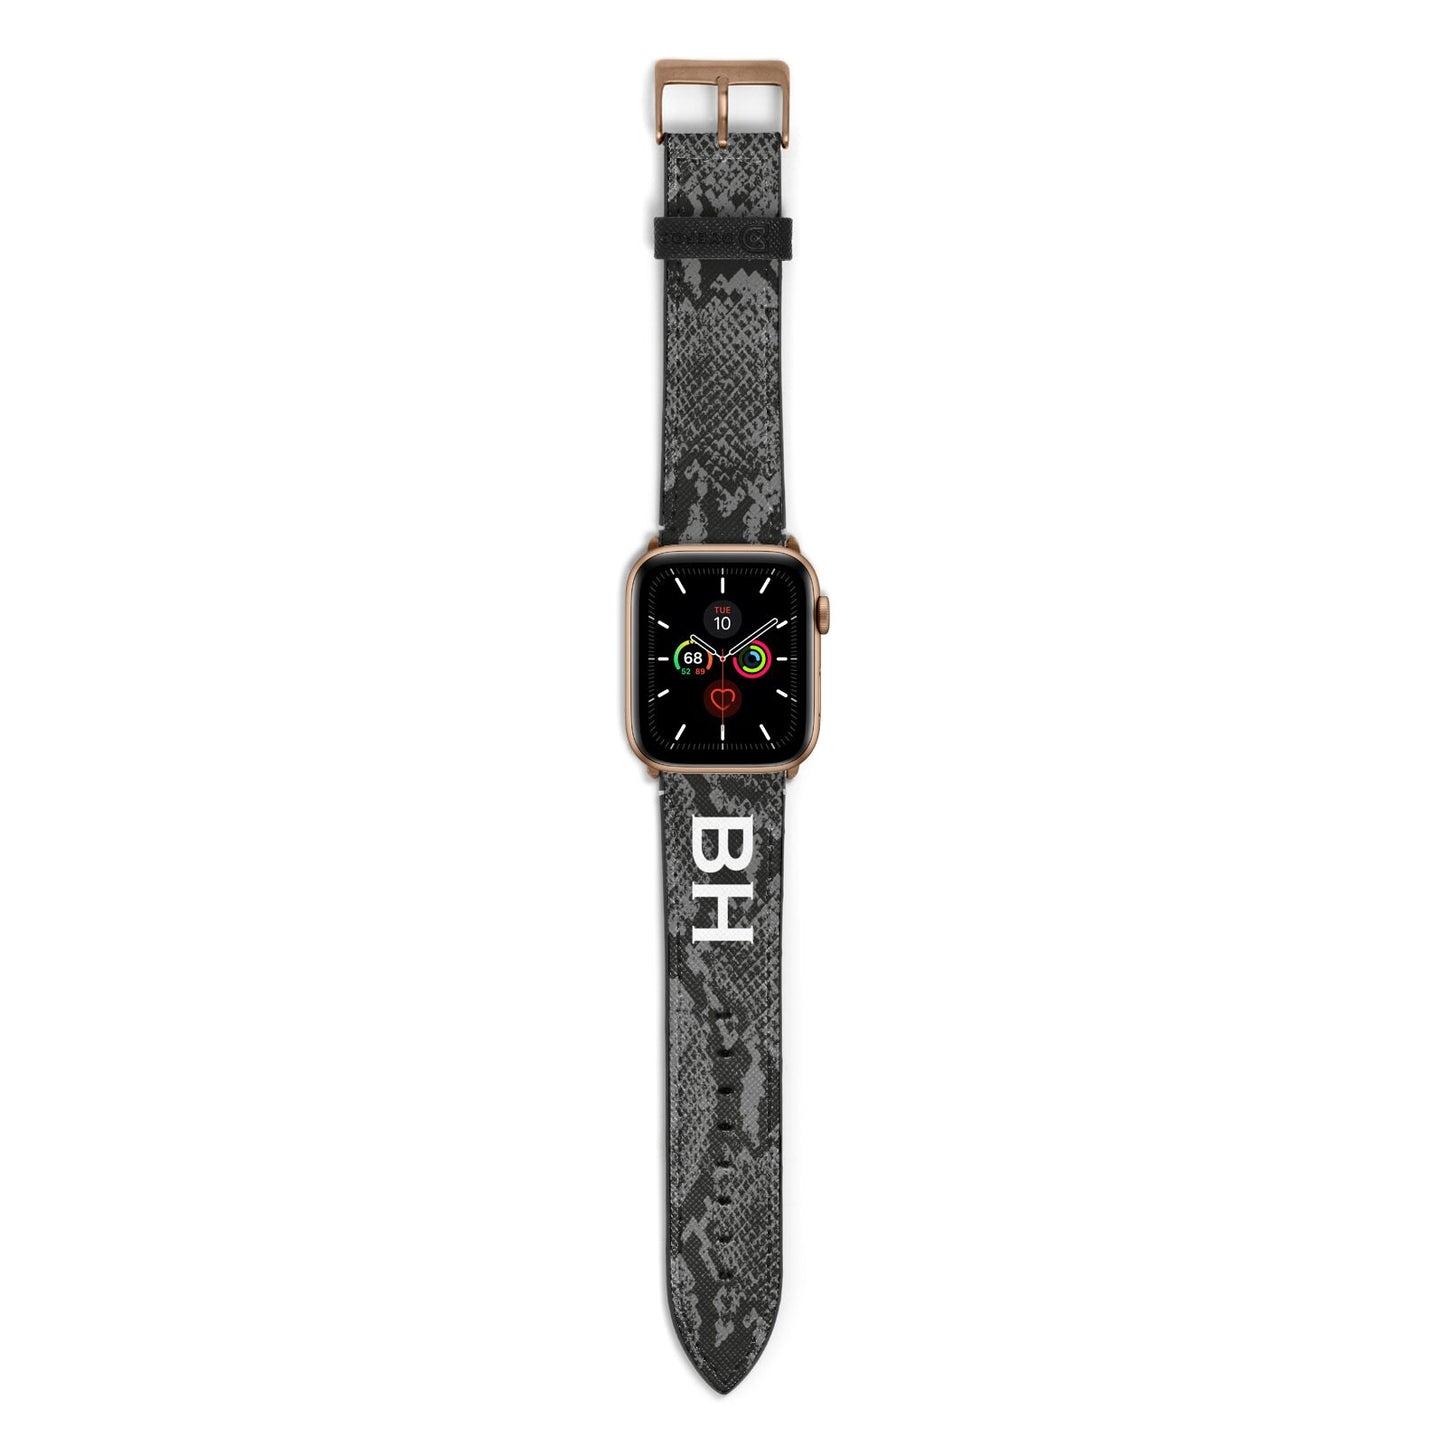 Personalised Snakeskin Apple Watch Strap with Gold Hardware